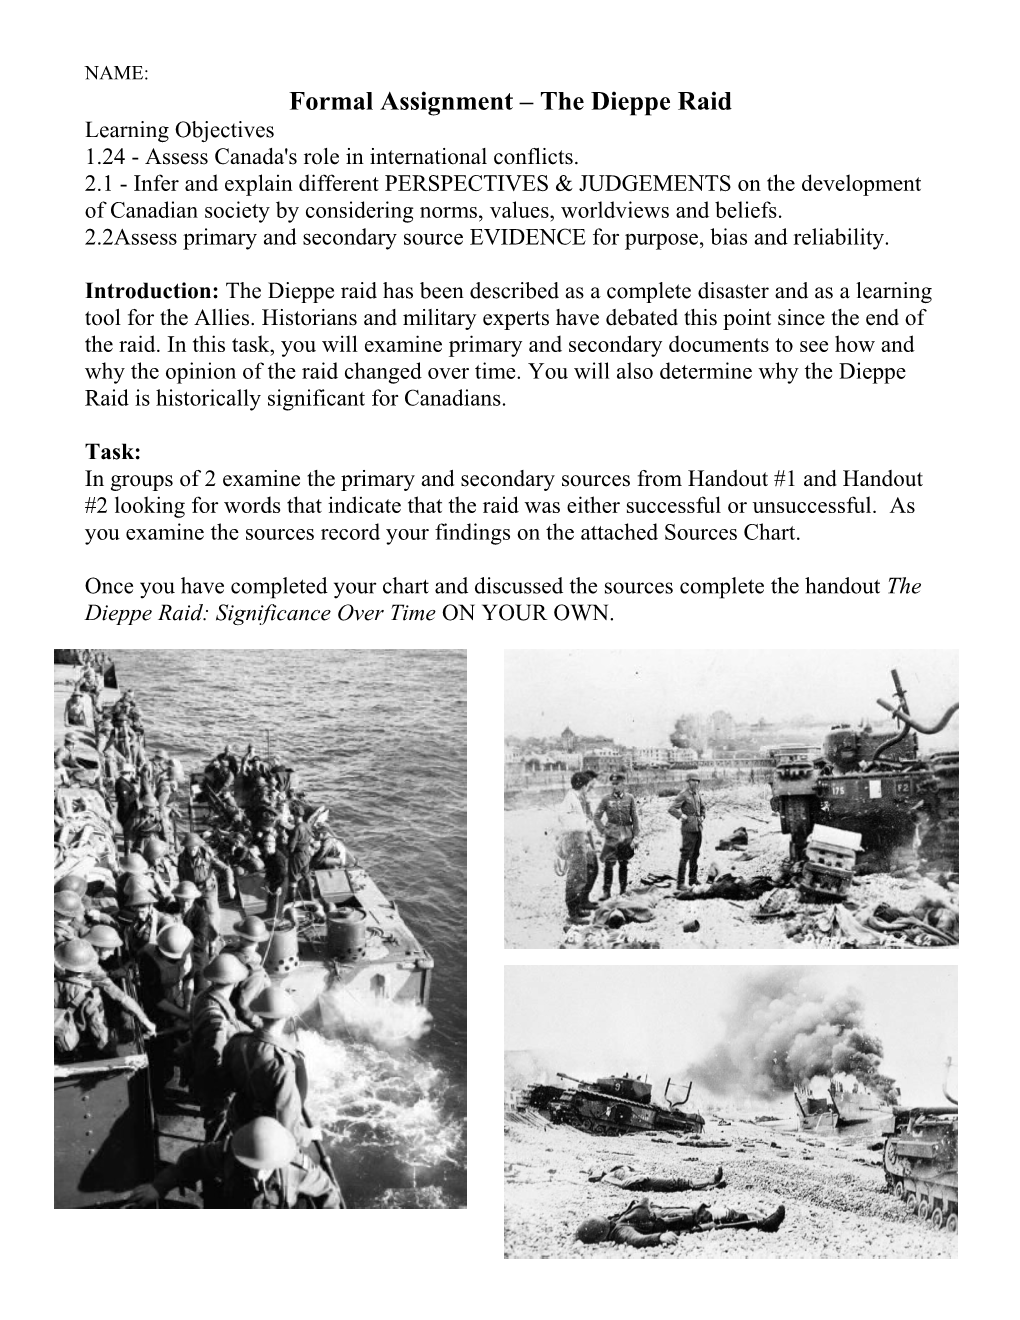 Formal Assignment the Dieppe Raid